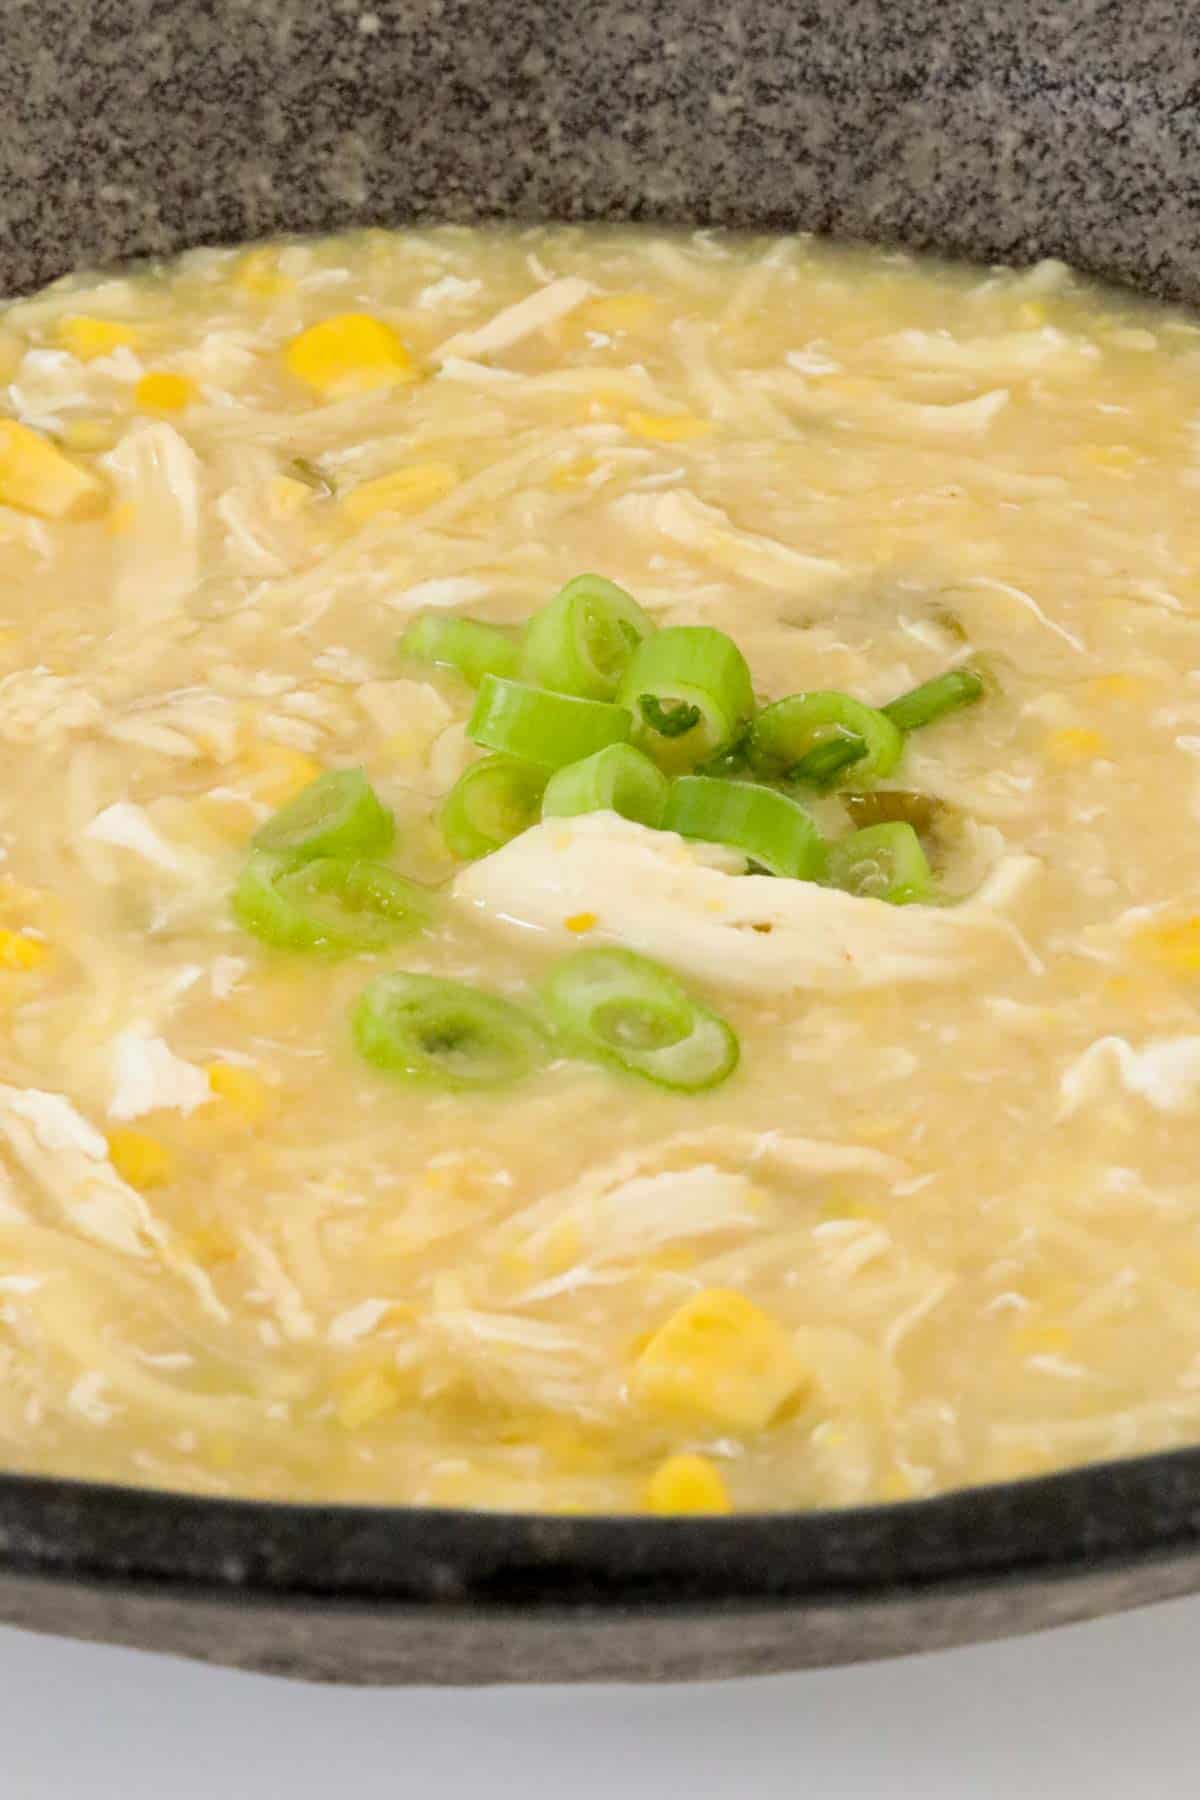 A close up of chicken, corn, and noodle soup with spring onions sprinkled over the top.